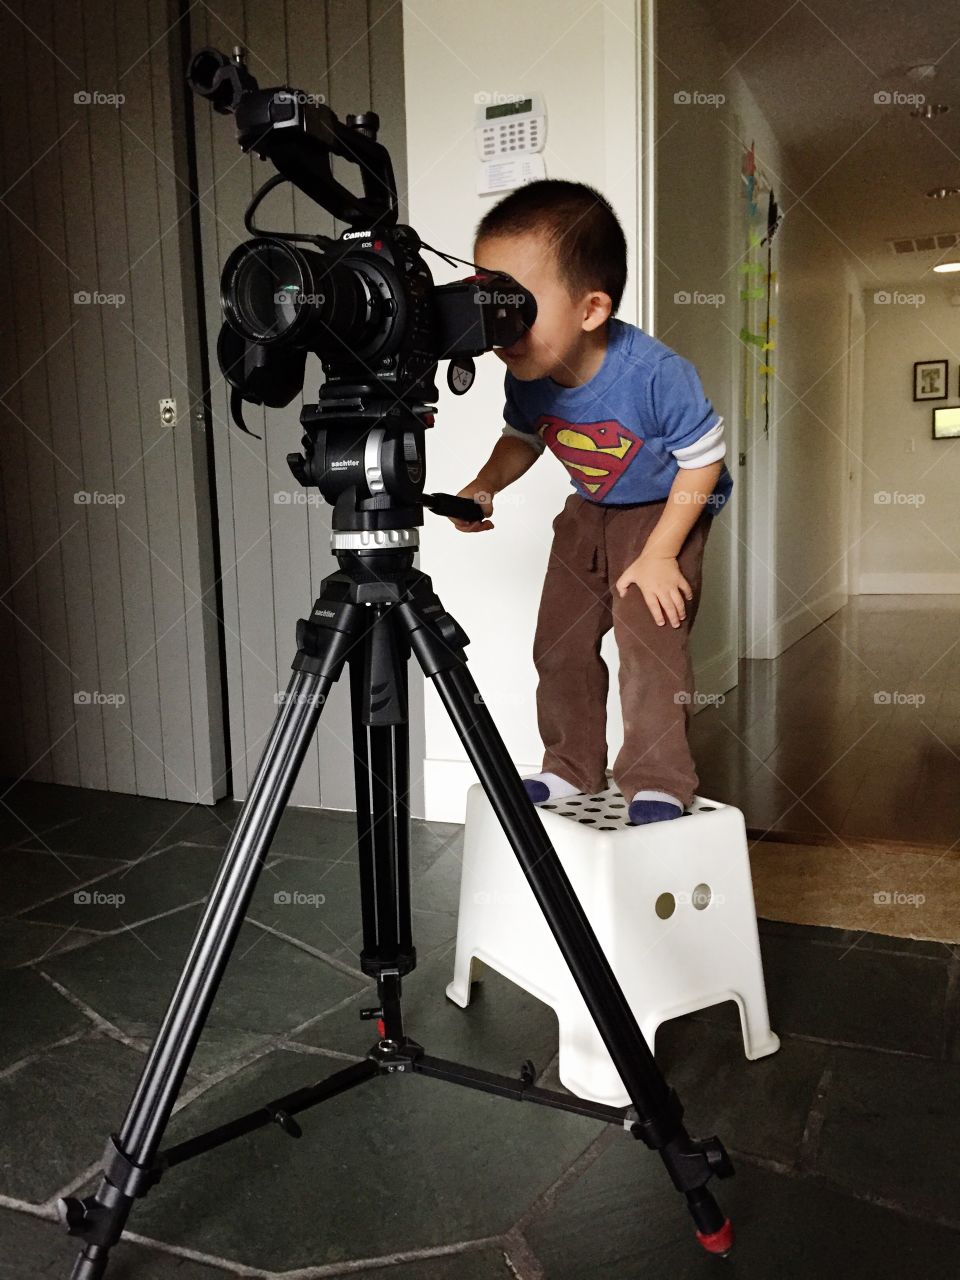 Toddler sets up a shot on his movie camera.